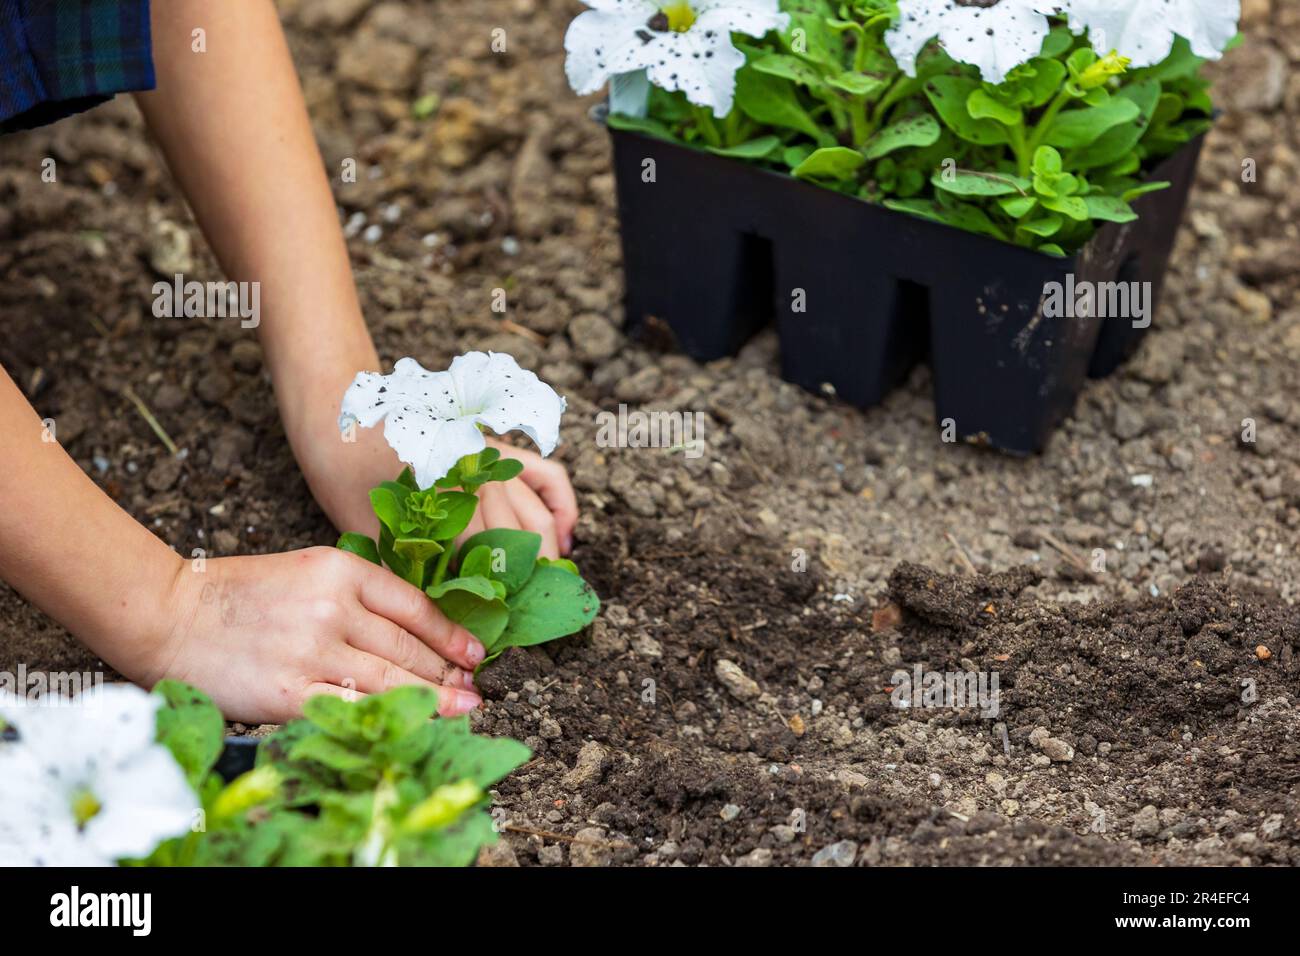 Hands planting new spring flowers in flowerbed. Stock Photo